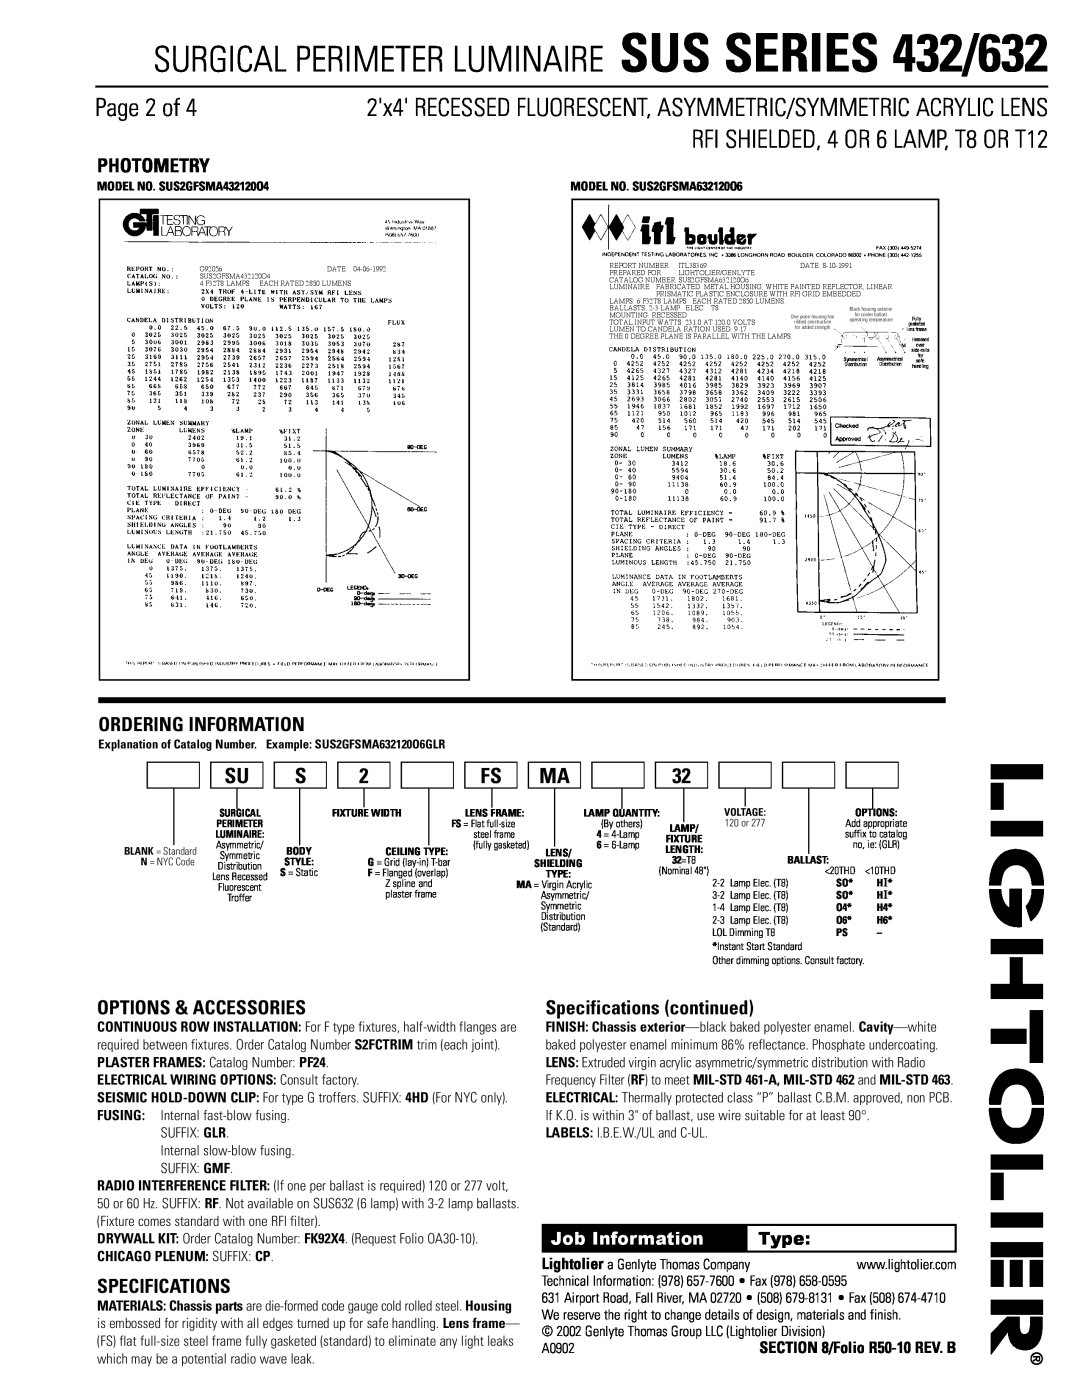 Lightolier 632 Page 2 of, Photometry, Ordering Information, Options & Accessories, Specifications, Job Information, Type 